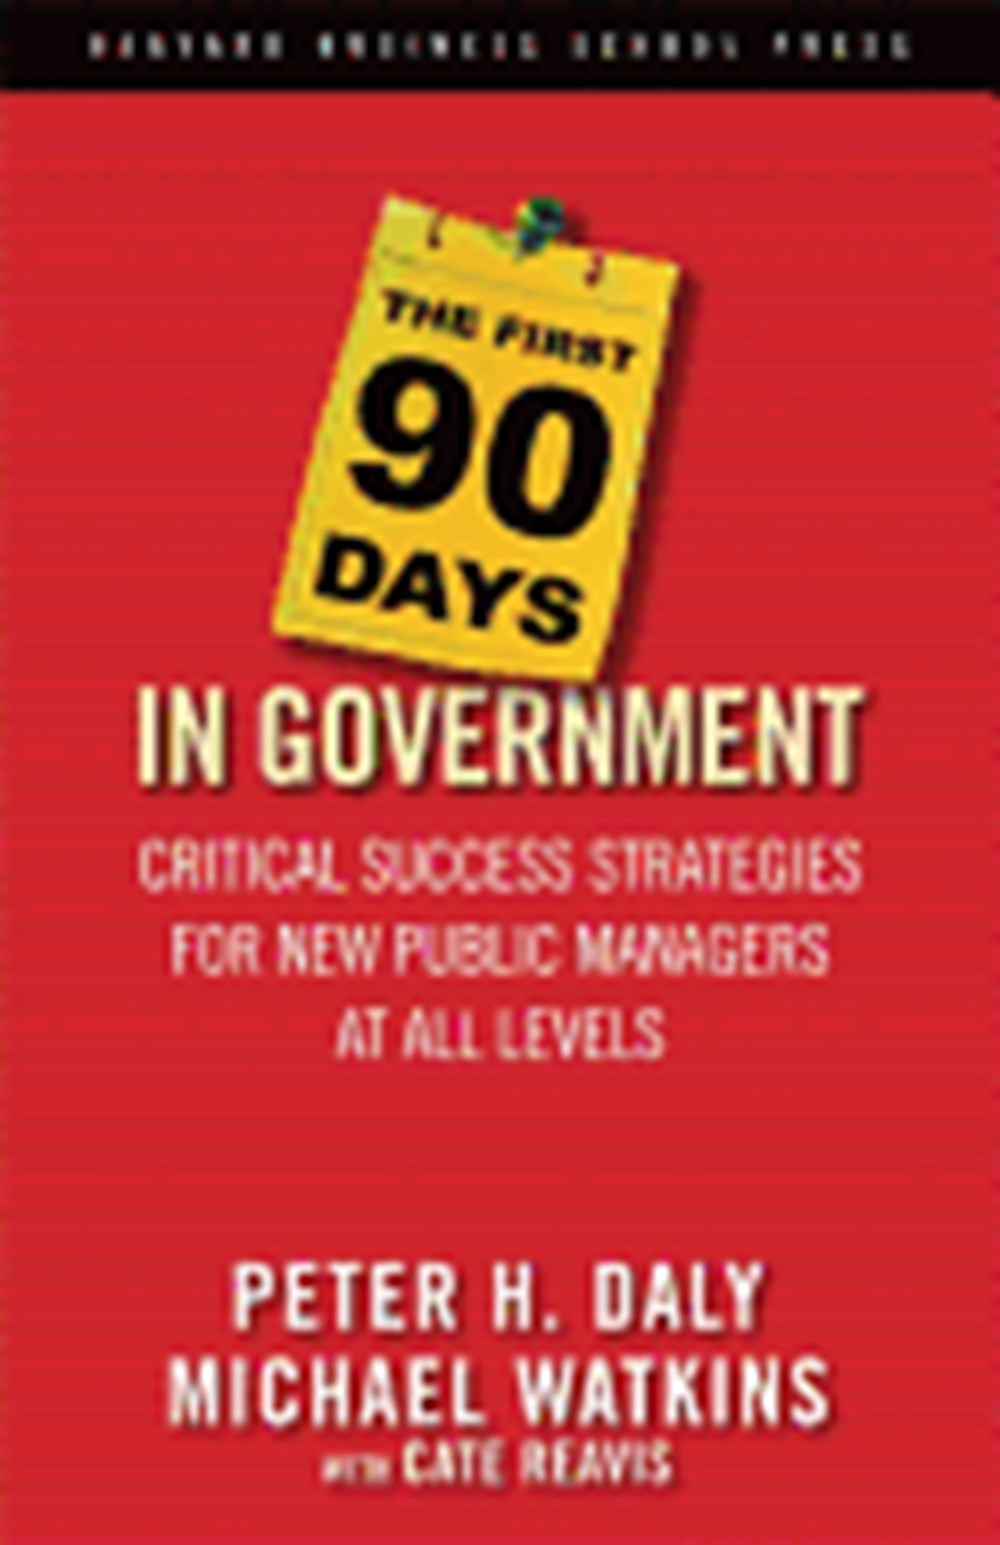 First 90 Days in Government: Critical Success Strategies for New Public Managers at All Levels